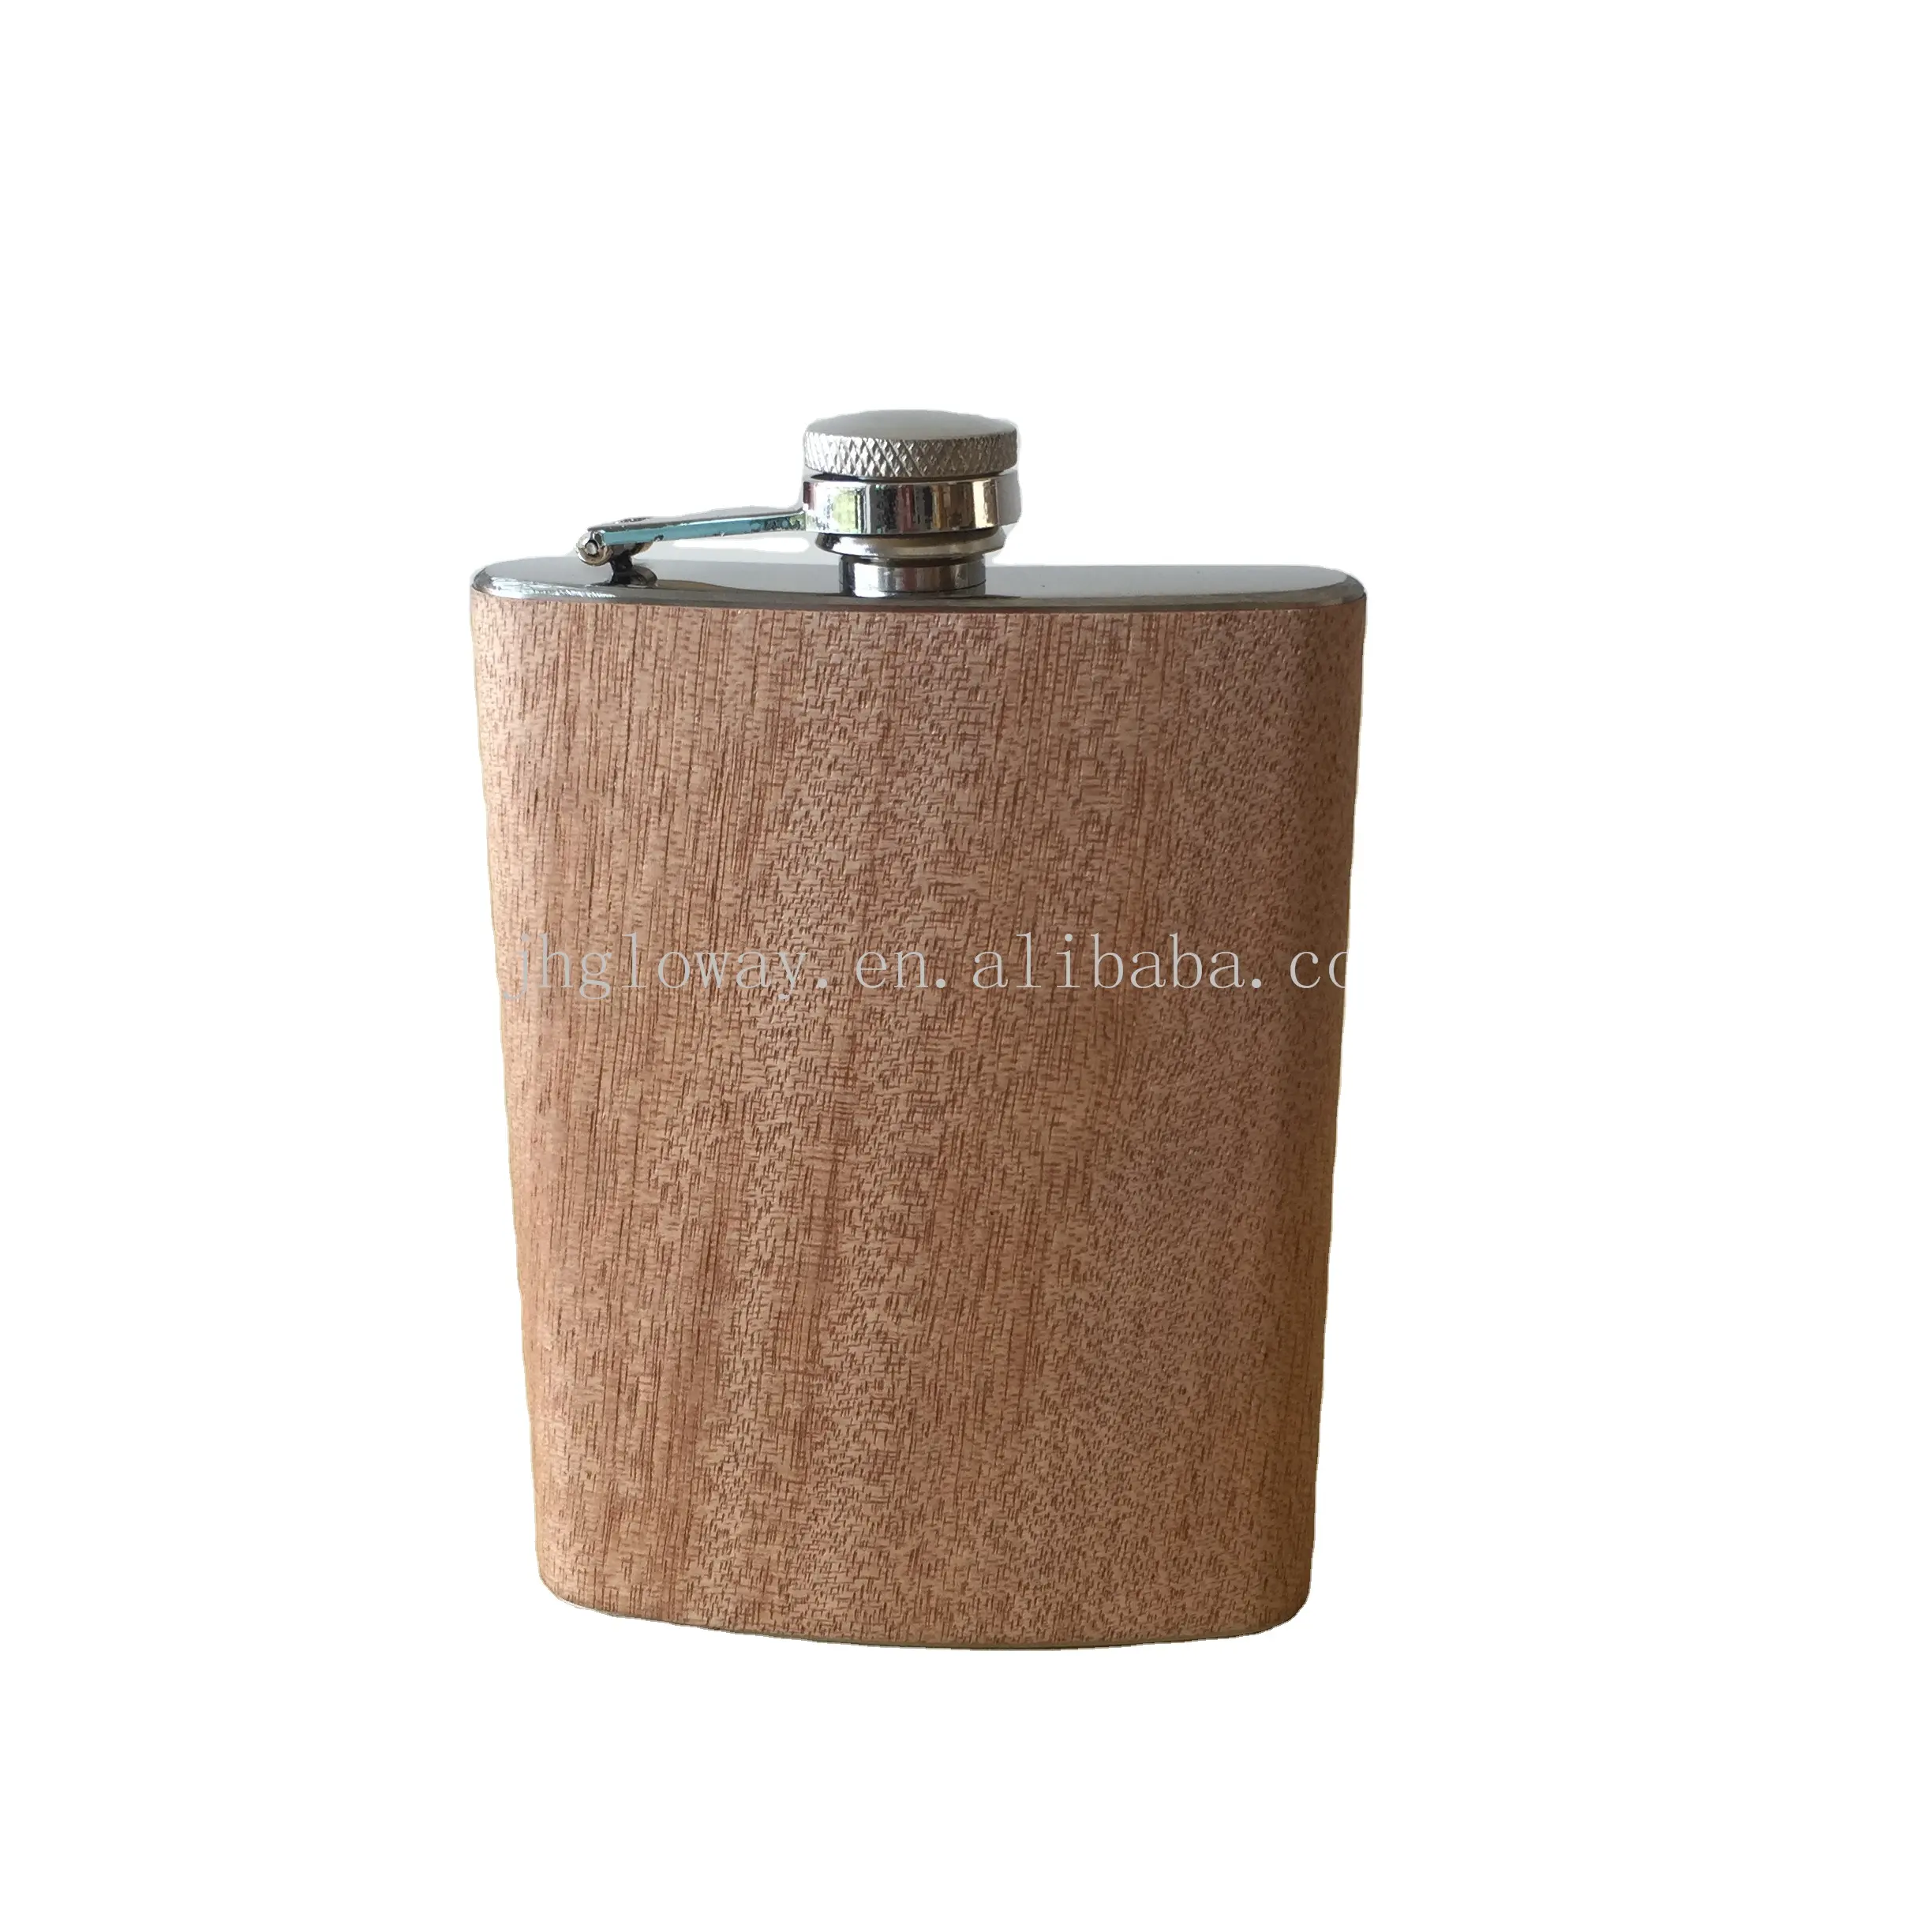 good quality 6oz 8oz wood leather portable stainless steel leather hip flask flagon whiskey